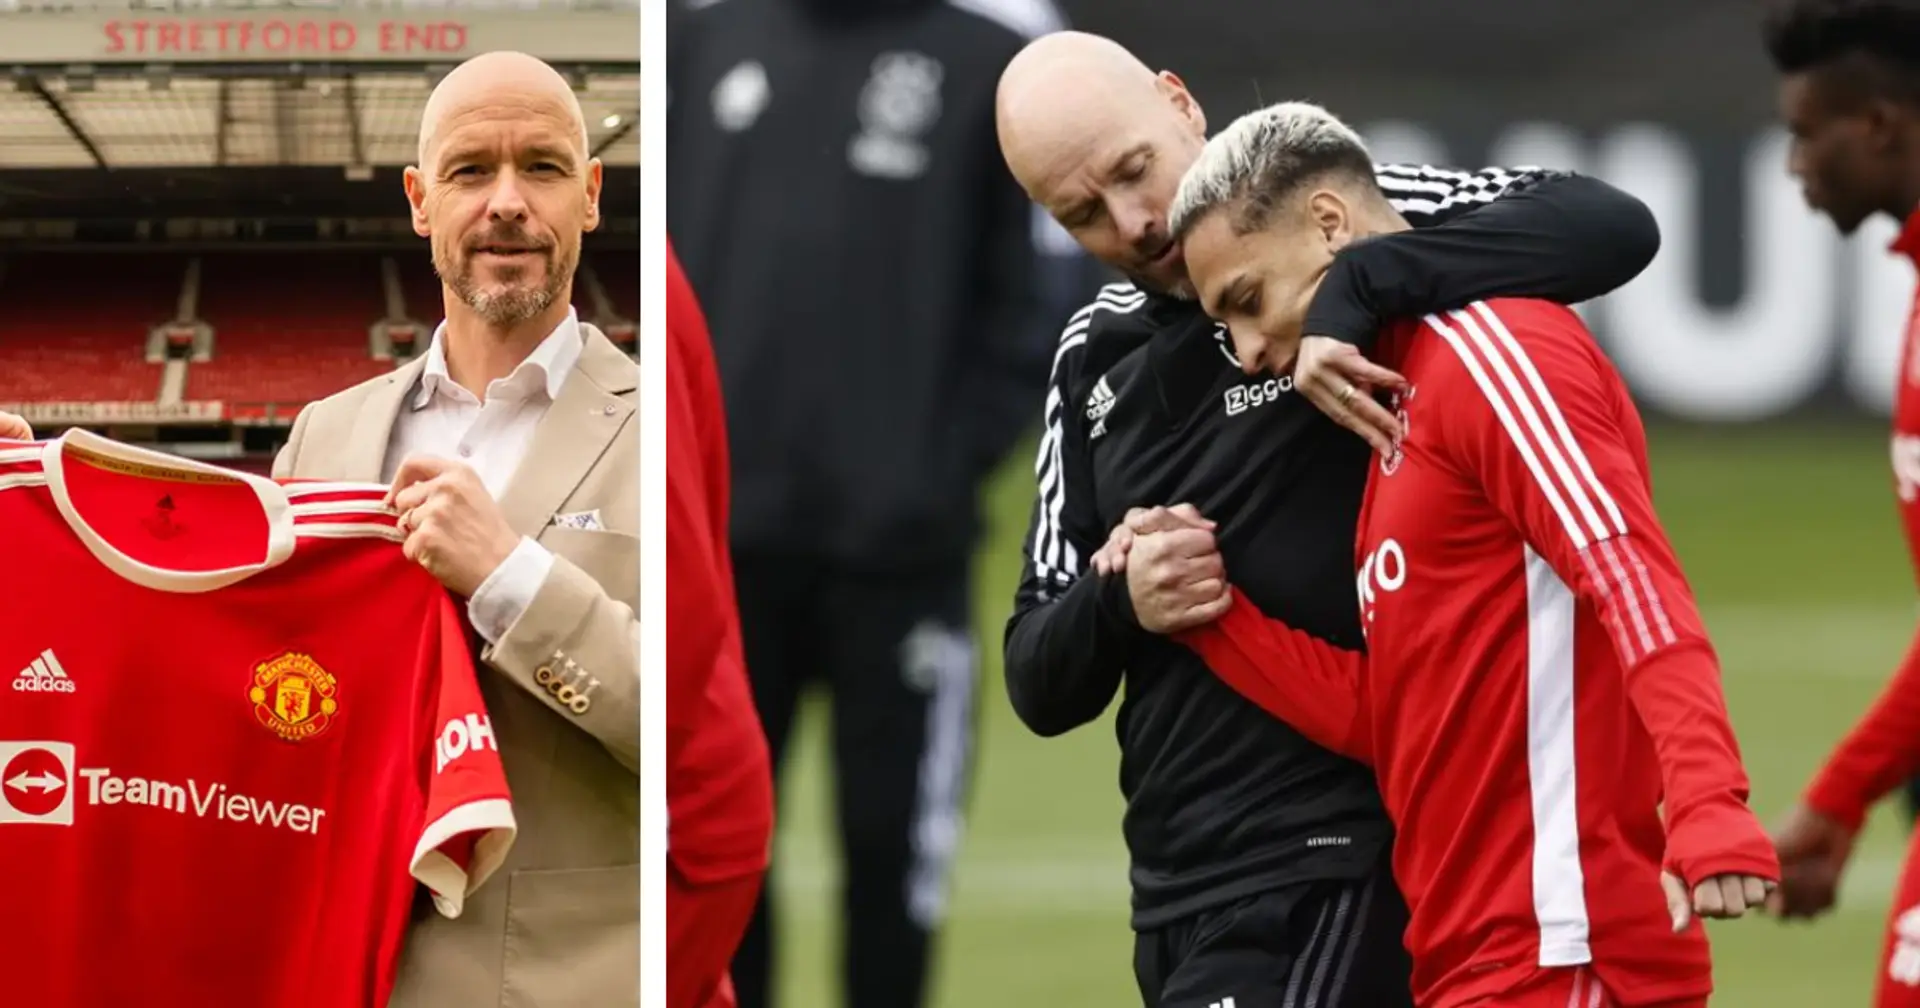 'I will always stand with you if you need me': throwback to Antony's parting words to Erik ten Hag